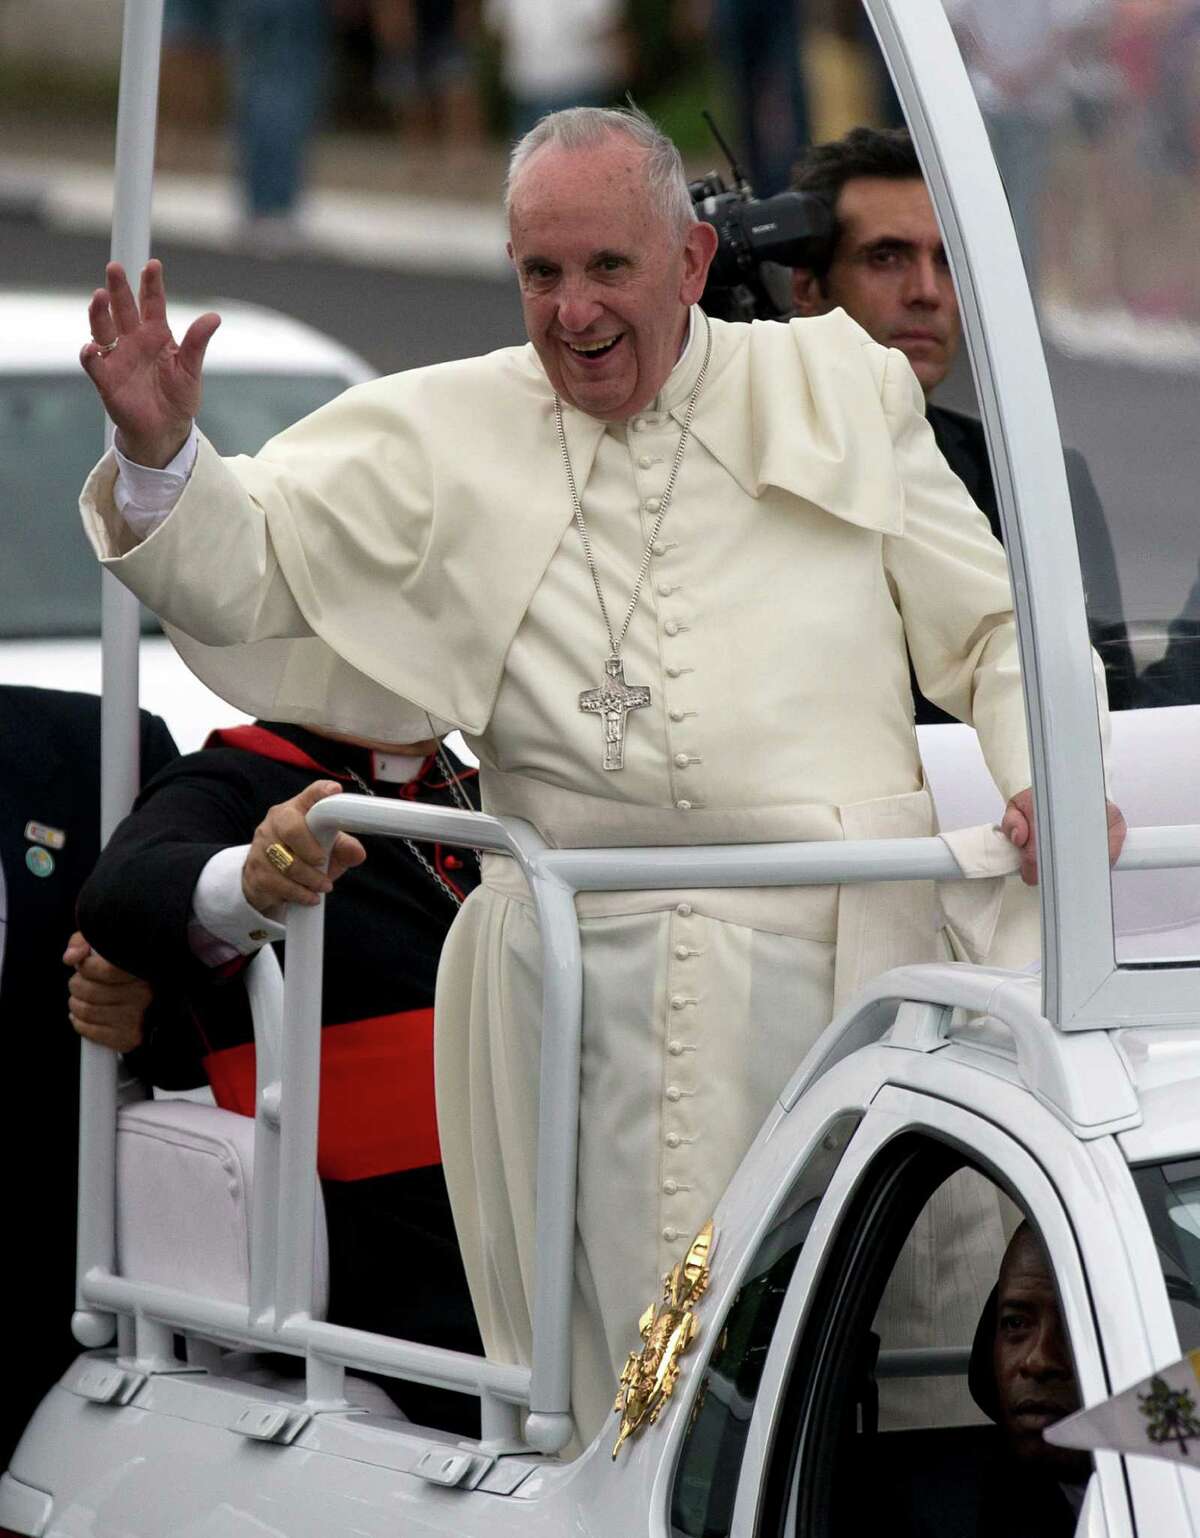 Pope Francis waves from his popemobile as he leaves the airport and arrives to Havana, Cuba, Saturday, Sept. 19, 2015. Pope Francis began his 10-day trip to Cuba and the United States, embarking on his first trip to the onetime Cold War foes after helping to nudge forward their historic rapprochement. (Ismael Francisco/Cubadebate Via AP)